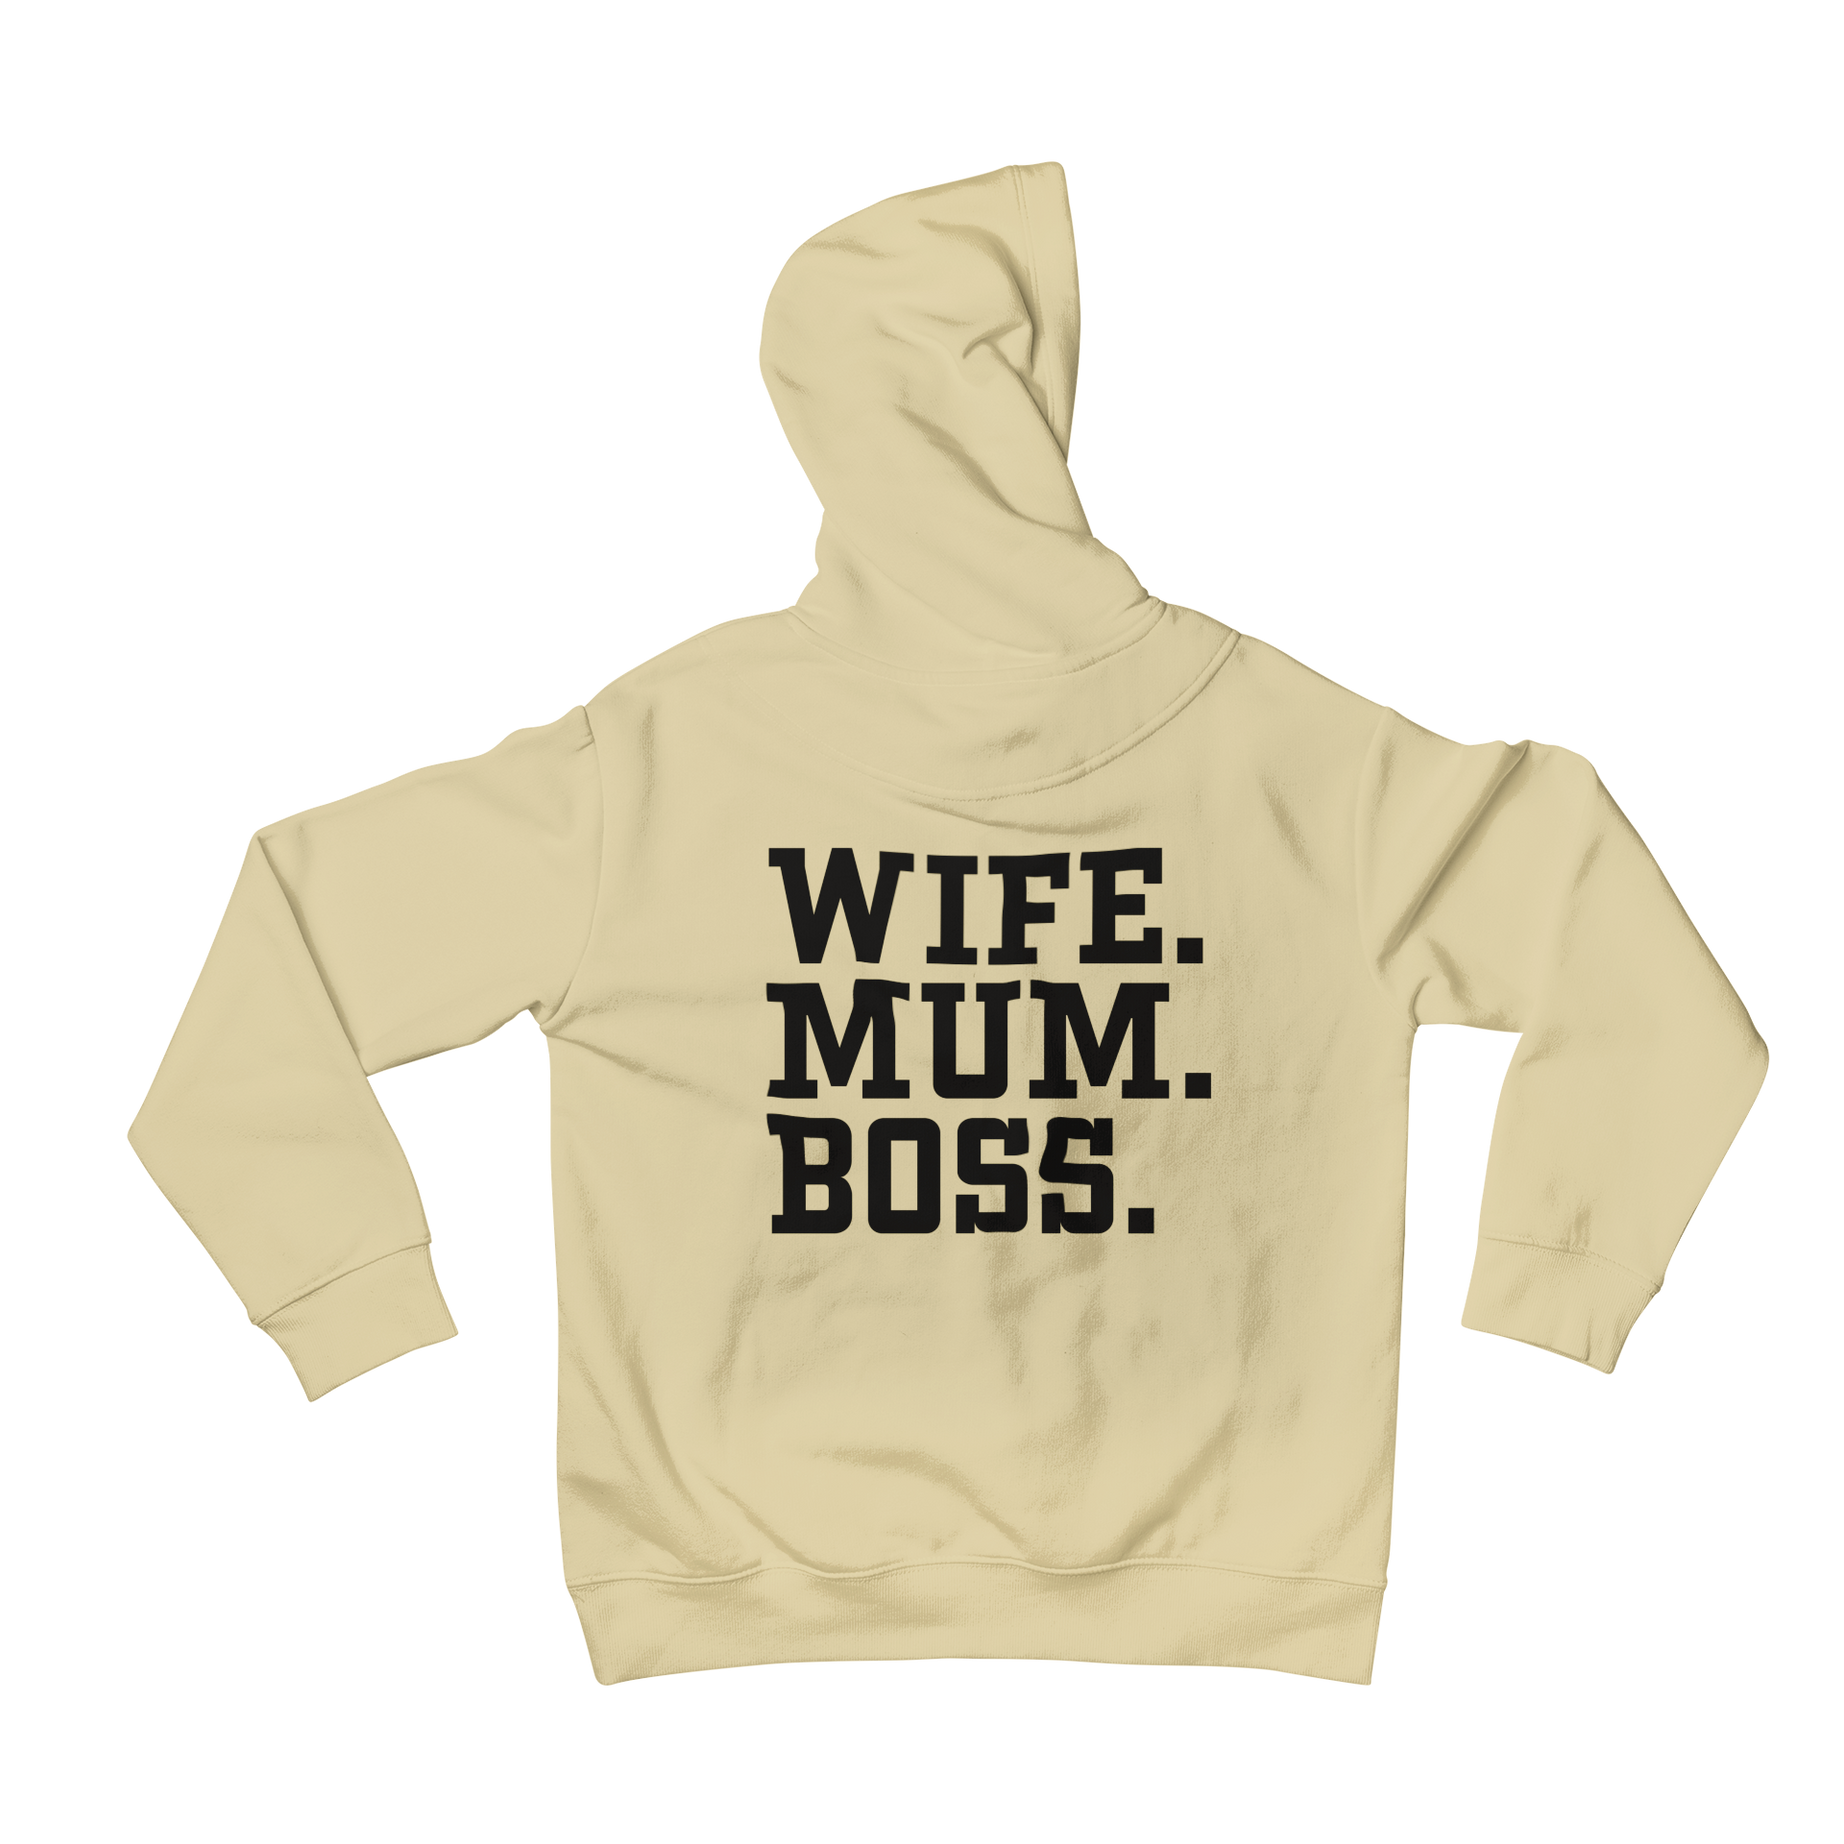 Looking for a comfortable and stylish hoodie? Check out Teevolution's warm back print hoodie with the slogan "Wife Mum Boss". This hoodie is a perfect choice for anyone who wants to stay comfortable while also looking fashionable. Shop now and stay warm this season!